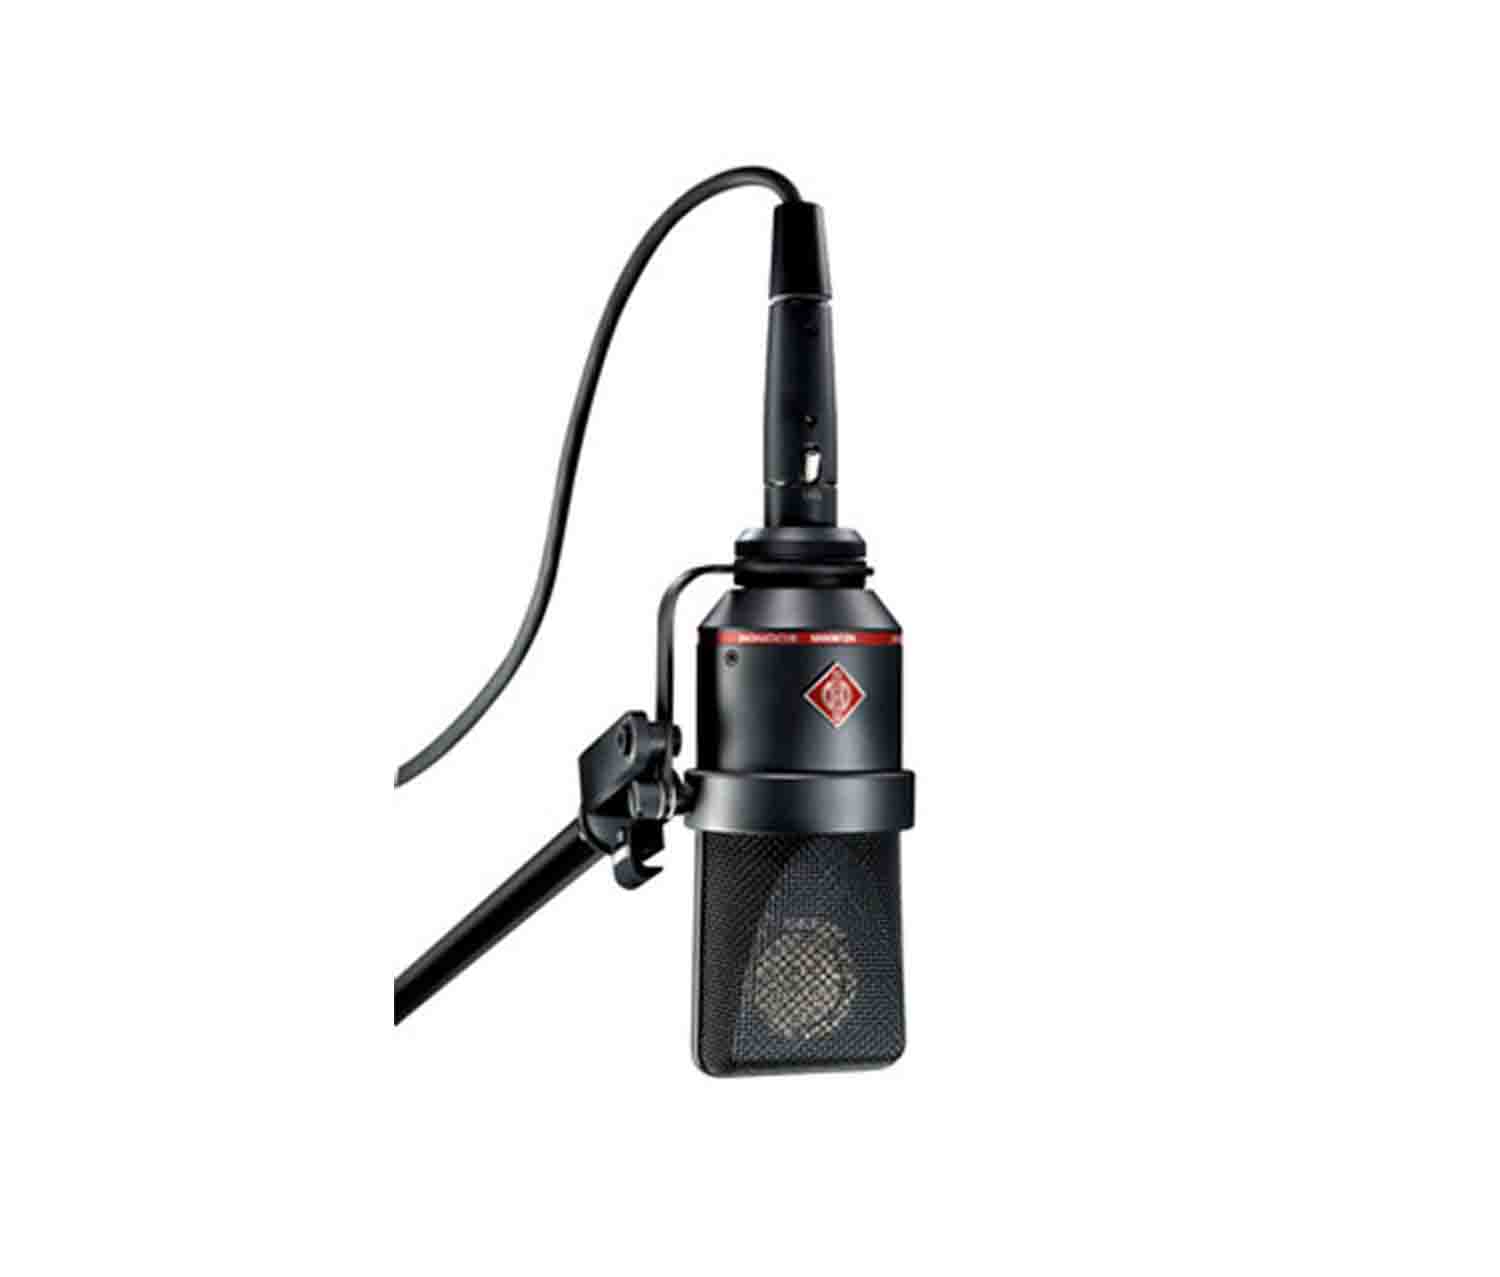 Neumann TLM 170 R-MT-STEREO Large-Diaphragm Multipattern Condenser Microphone with Shockmount - Black - Hollywood DJ